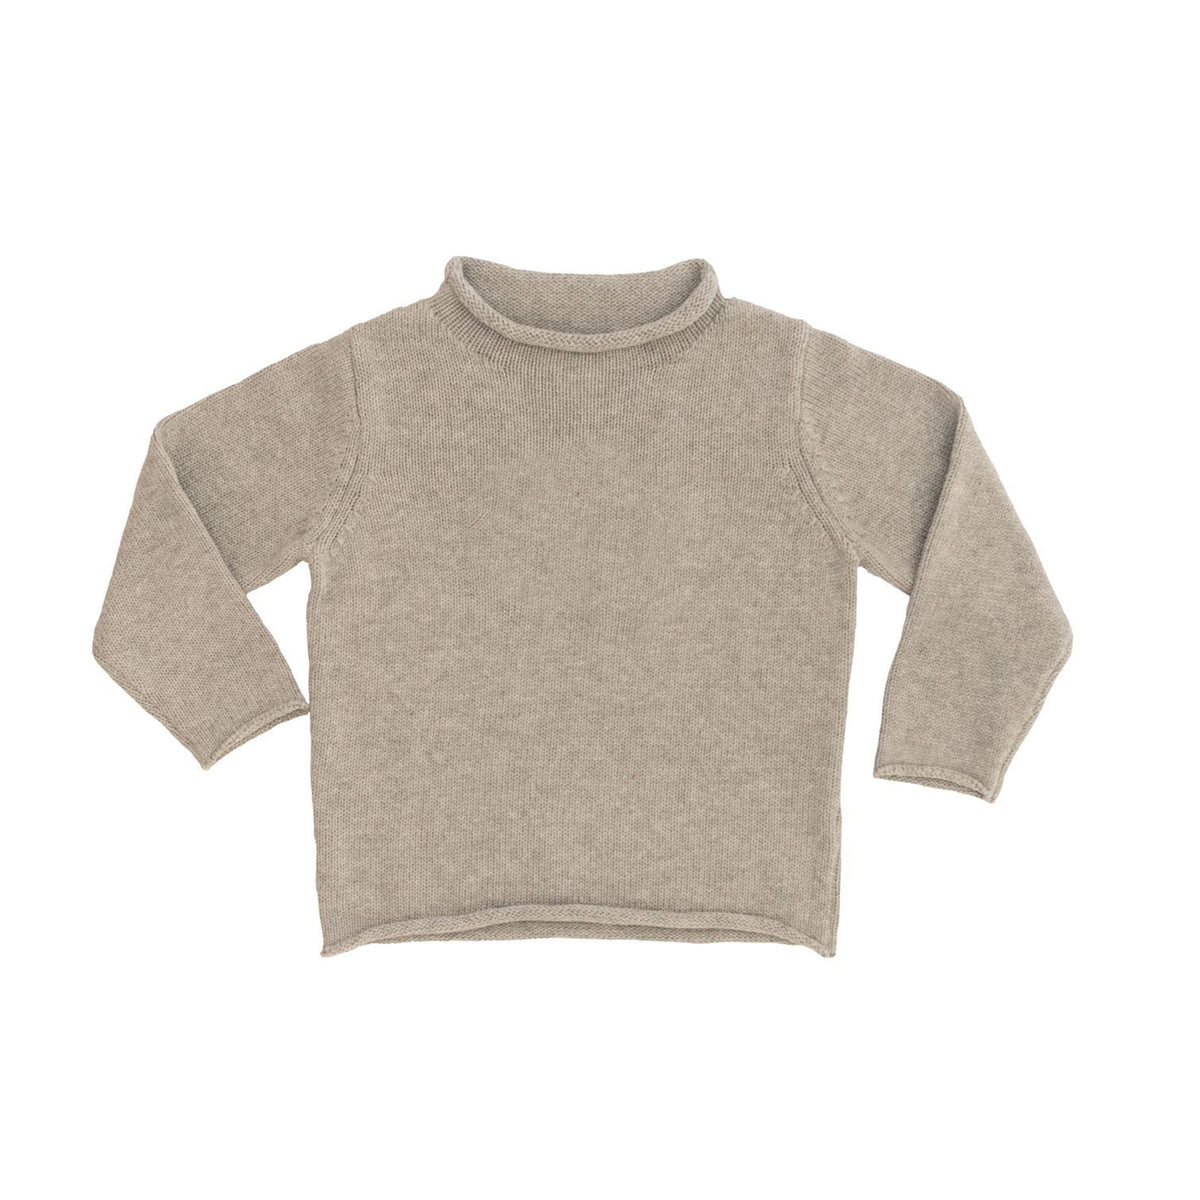 Gray Cotton Rollneck Sweater - All She Wrote